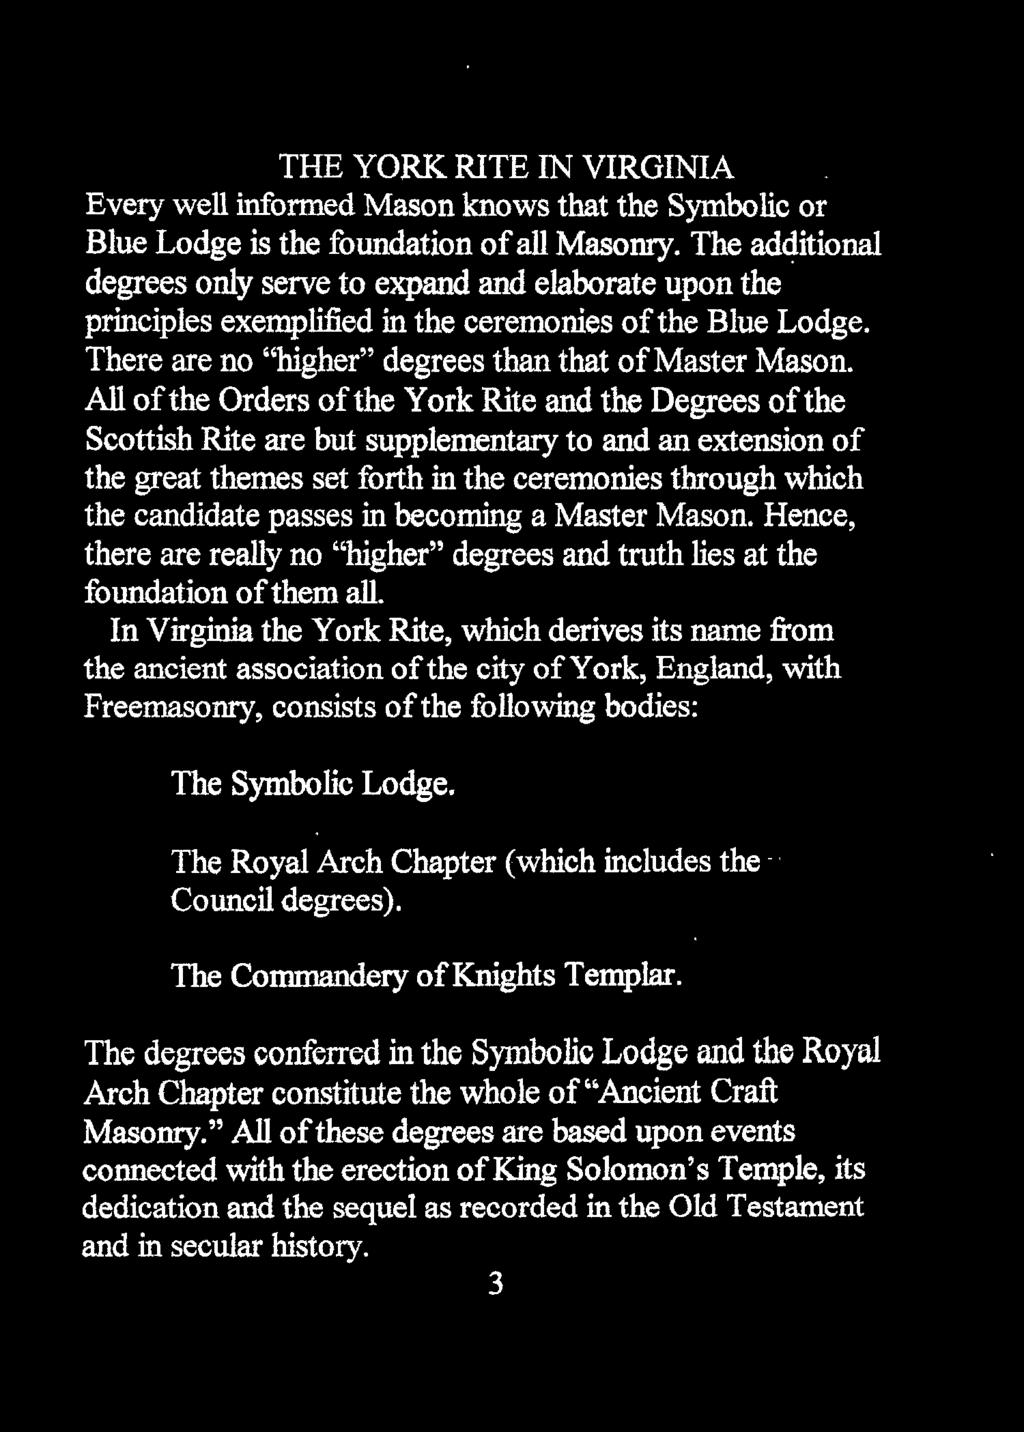 All of the Orders of the York Rite and the Degrees of the Scottish Rite are but supplementary to and an extension of the great themes set forth in the ceremonies through which the candidate passes in